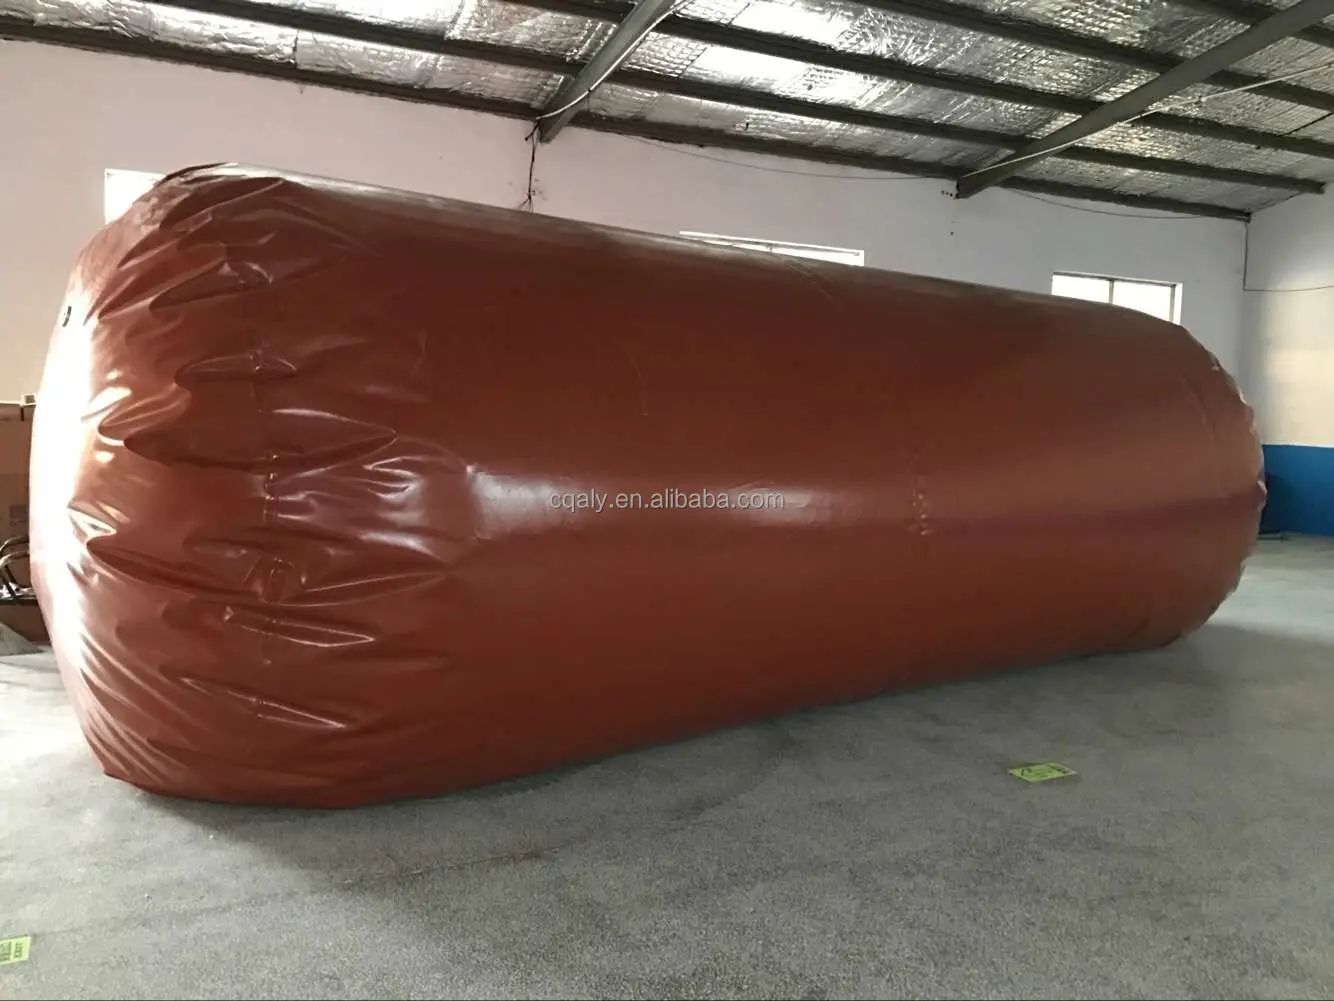 HDPE Geomembrane for Biogas Digester Plant Storage Bag Tank Cover in  Indonesia with Direct Factory Price China - China Biogas Digester HDPE  Geomembrane, Biogas Digester Liner | Made-in-China.com